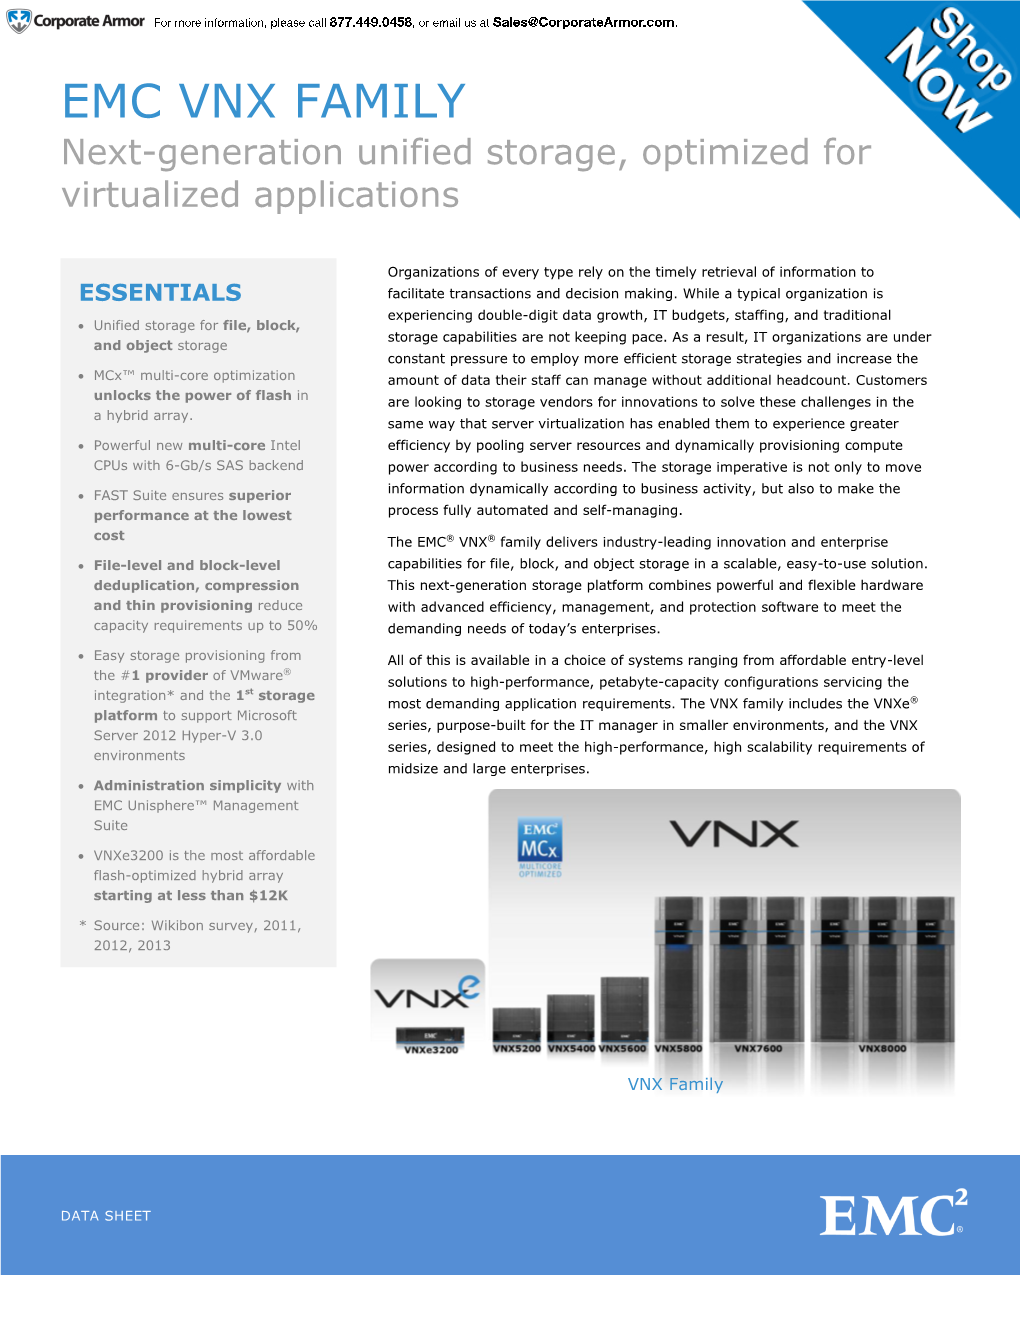 EMC VNX FAMILY Next-Generation Unified Storage, Optimized for Virtualized Applications